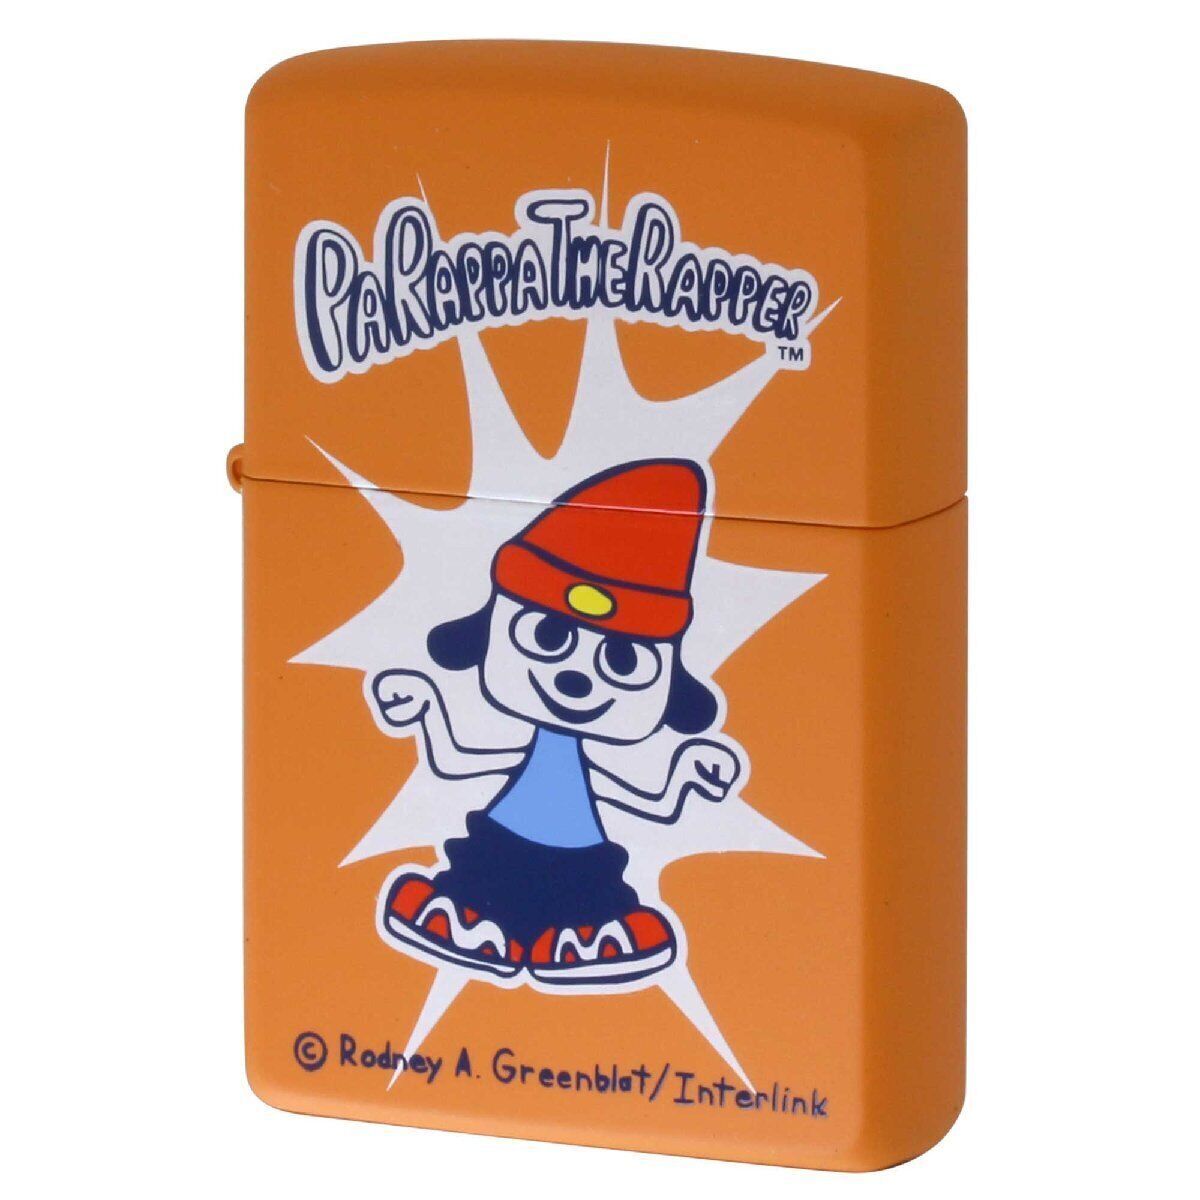 Out of Print Vintage Zippo 1998 LIMITED PARAPPA THE RAPPER